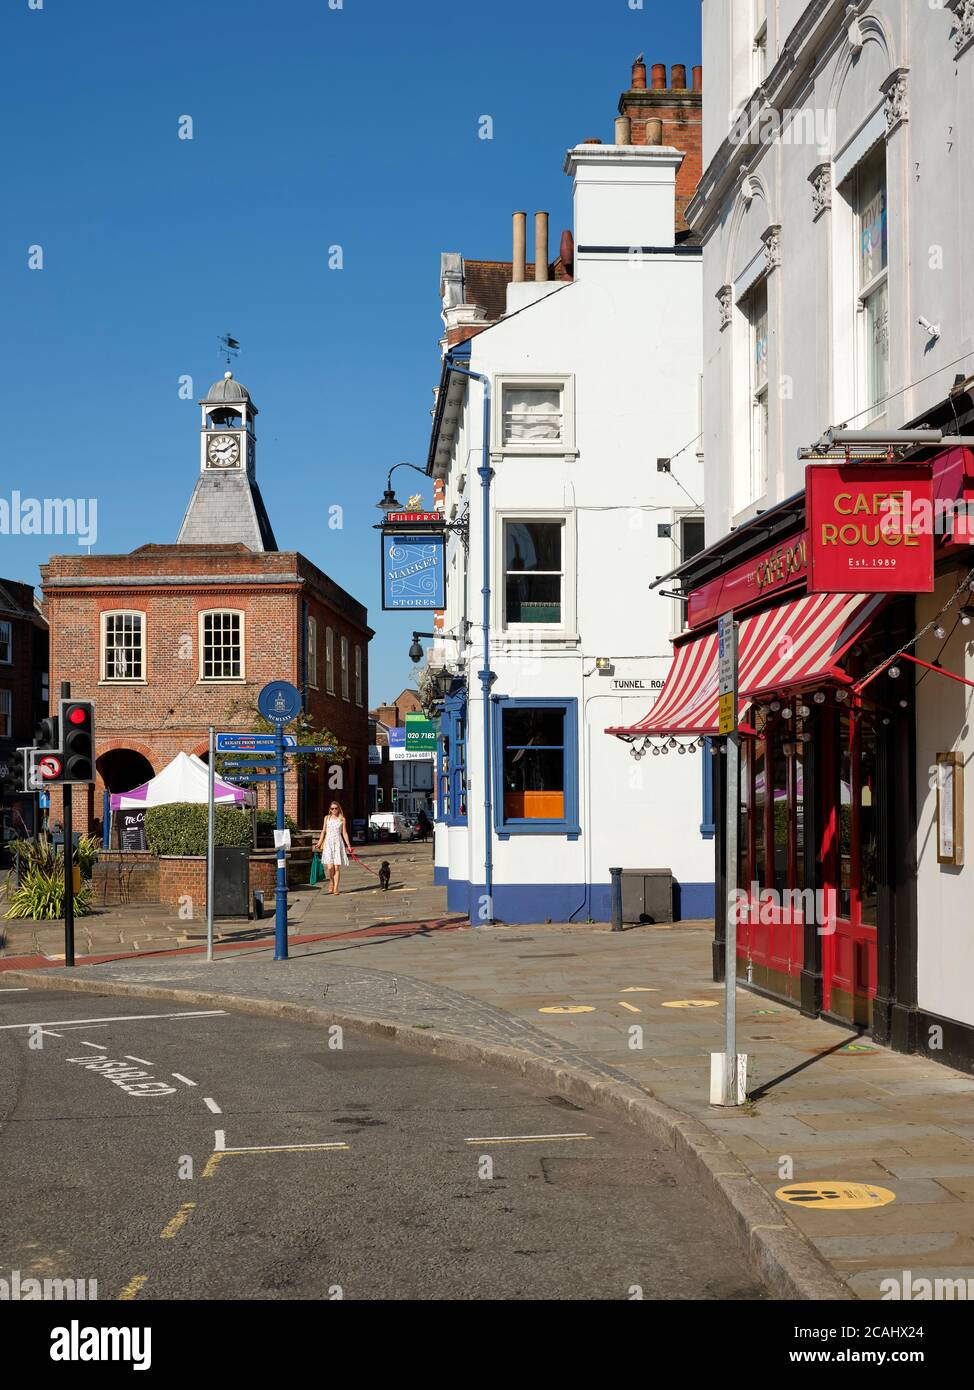 Reigate High Street and the Old Town Market Hall in Reigate Surrey England UK - Summer 2020 Stock Photo